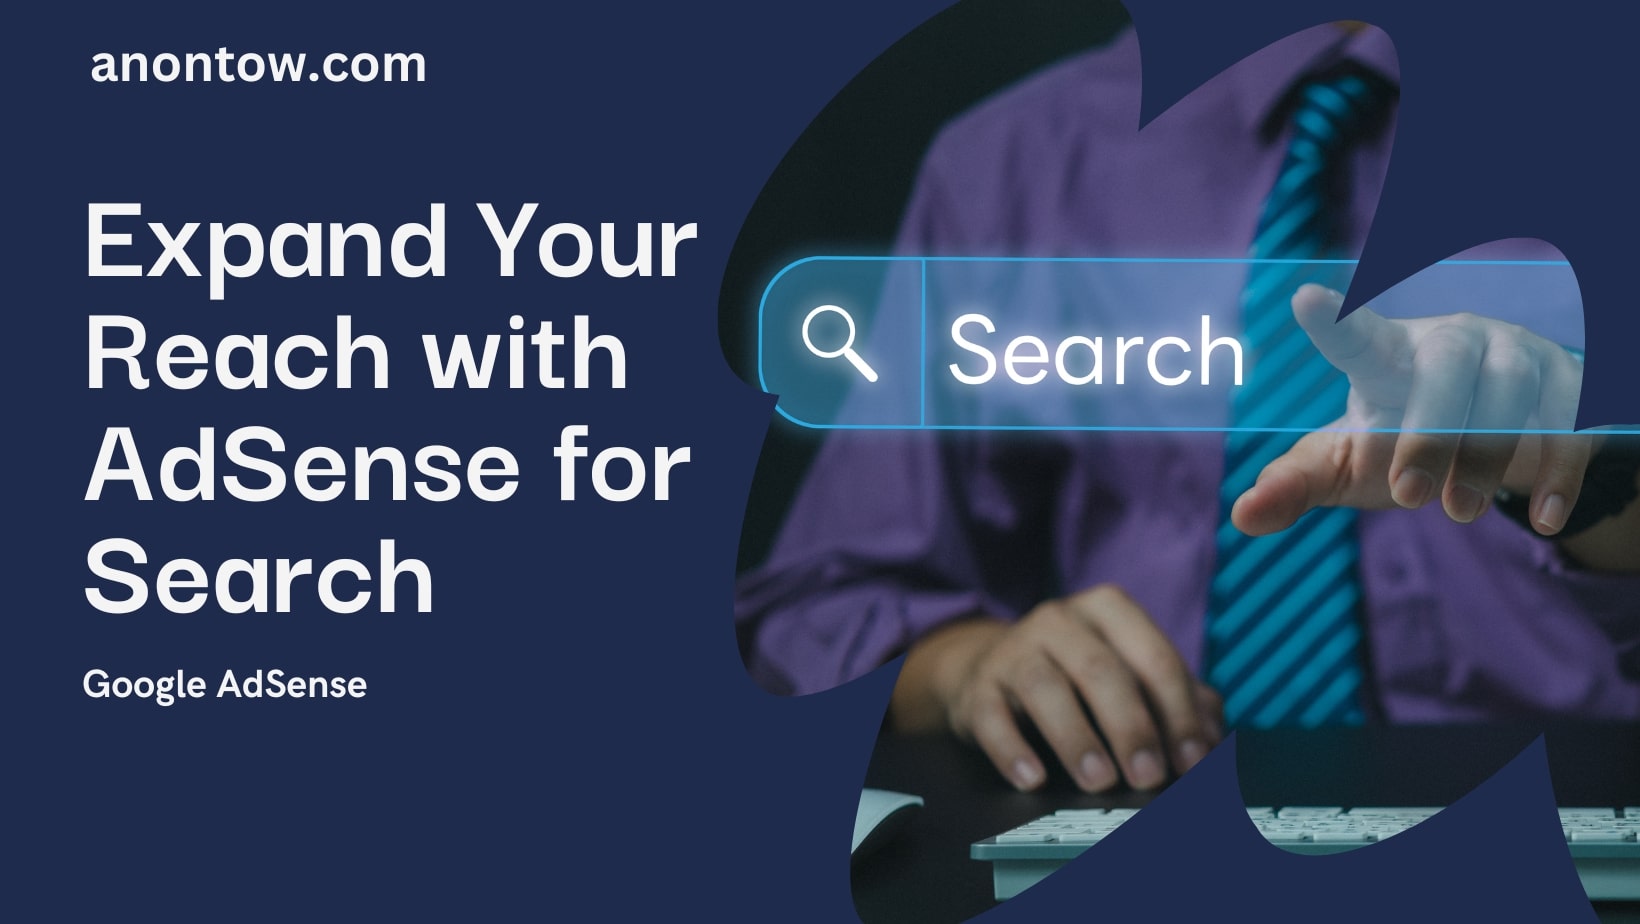 New serving sites will be used for AdSense for Search